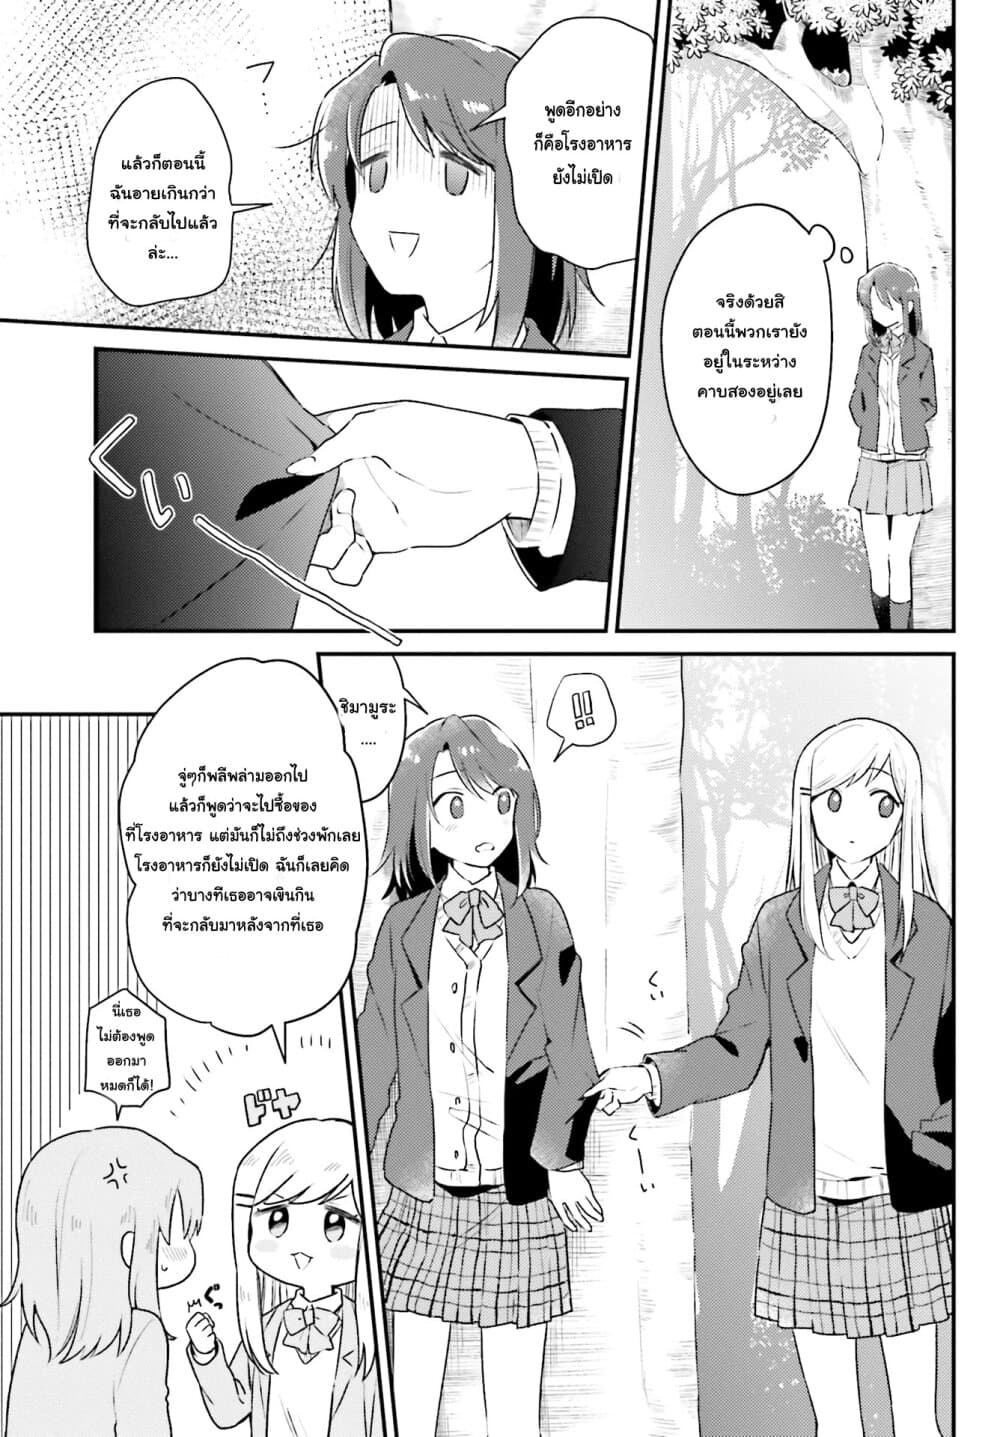 Adachi-to-Shimamura-Official-Comic-Anthology-Chapter2-11.jpg